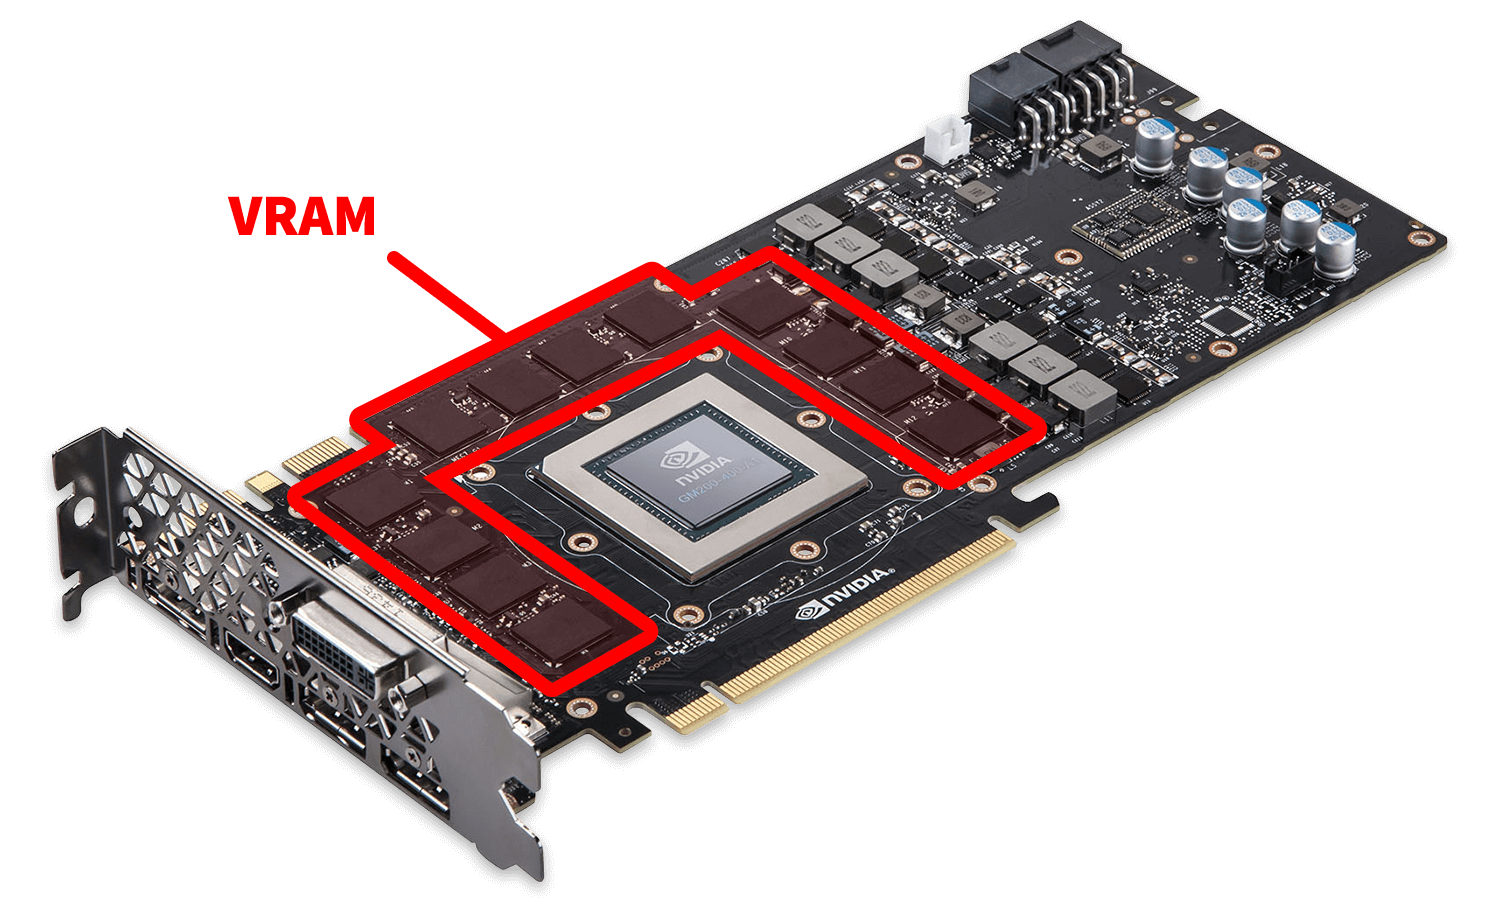 VRAM chips on an NVIDIA graphics card